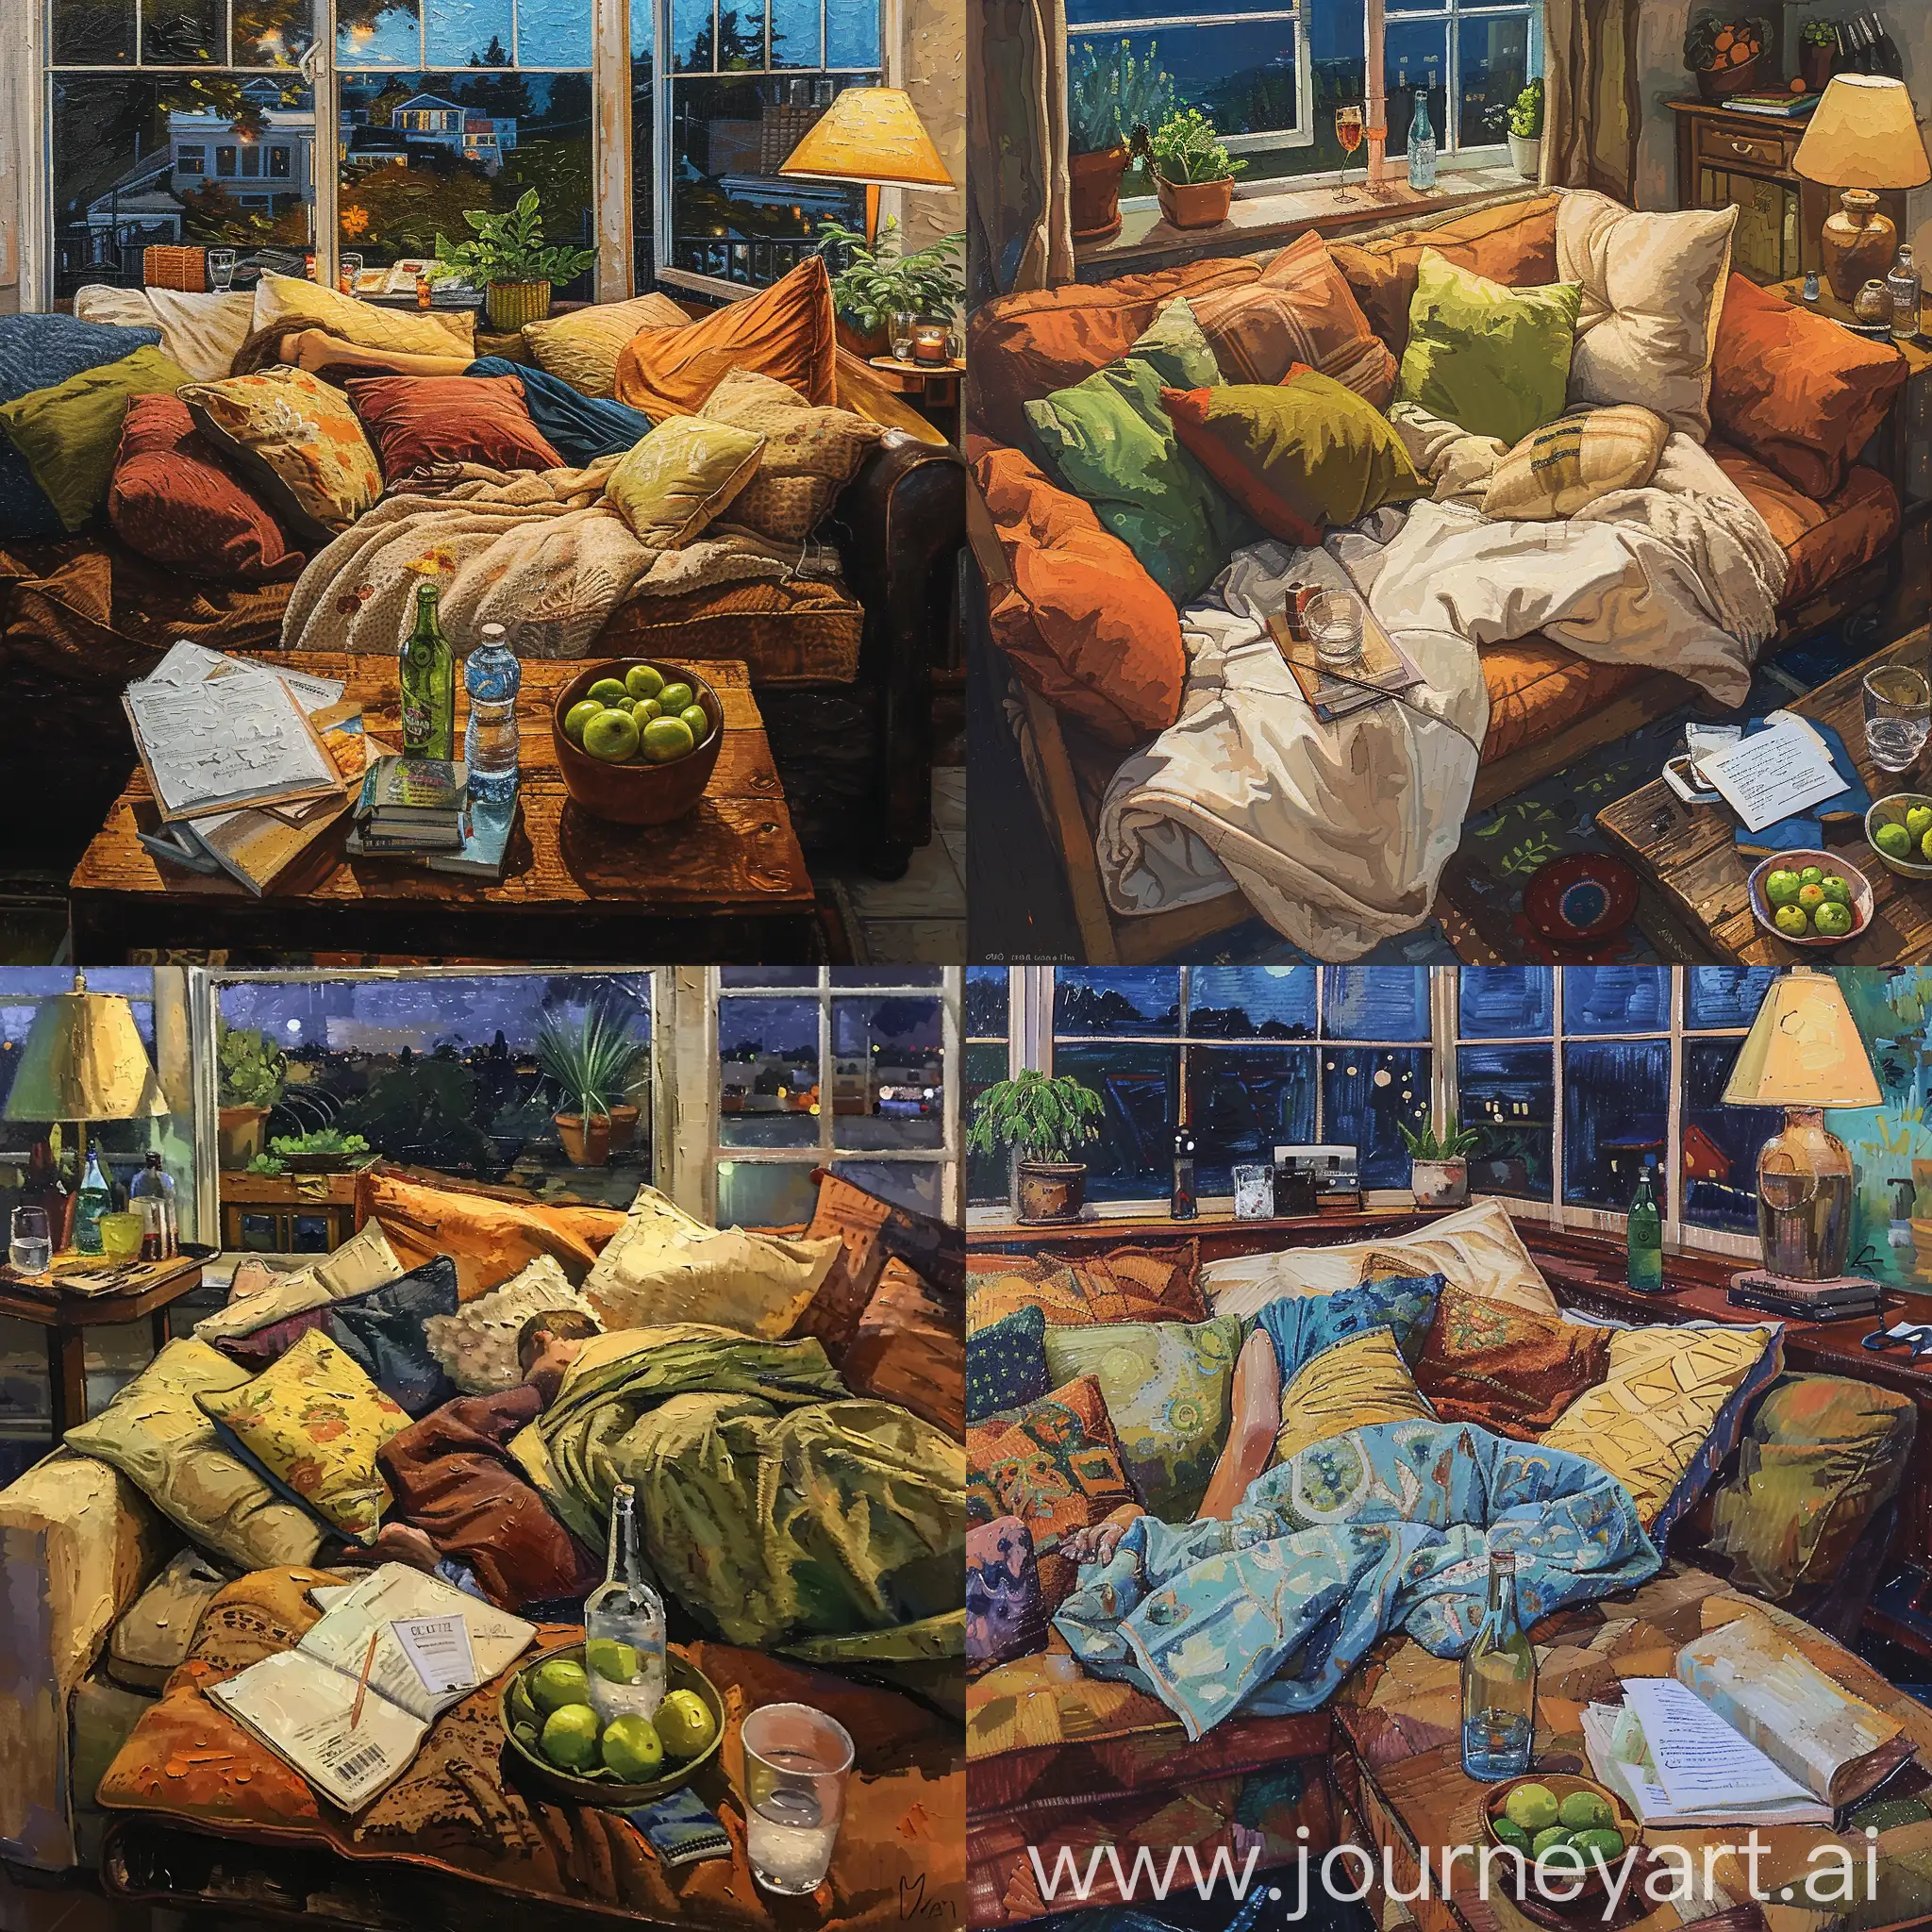 textured oil painting of an indoor scene, a person lying on the couch, The scene should include a cozy room with various pillows and a blanket on the couch, a window showing an outdoor view, a side table with a glass of water, a bottle, and papers or a book. Add a bowl of green fruit and a potted plant for a natural touch, Use an warm earthy color palette and paint a textured painting style, scene is in nighttime, van gogh style --ar 16:9
